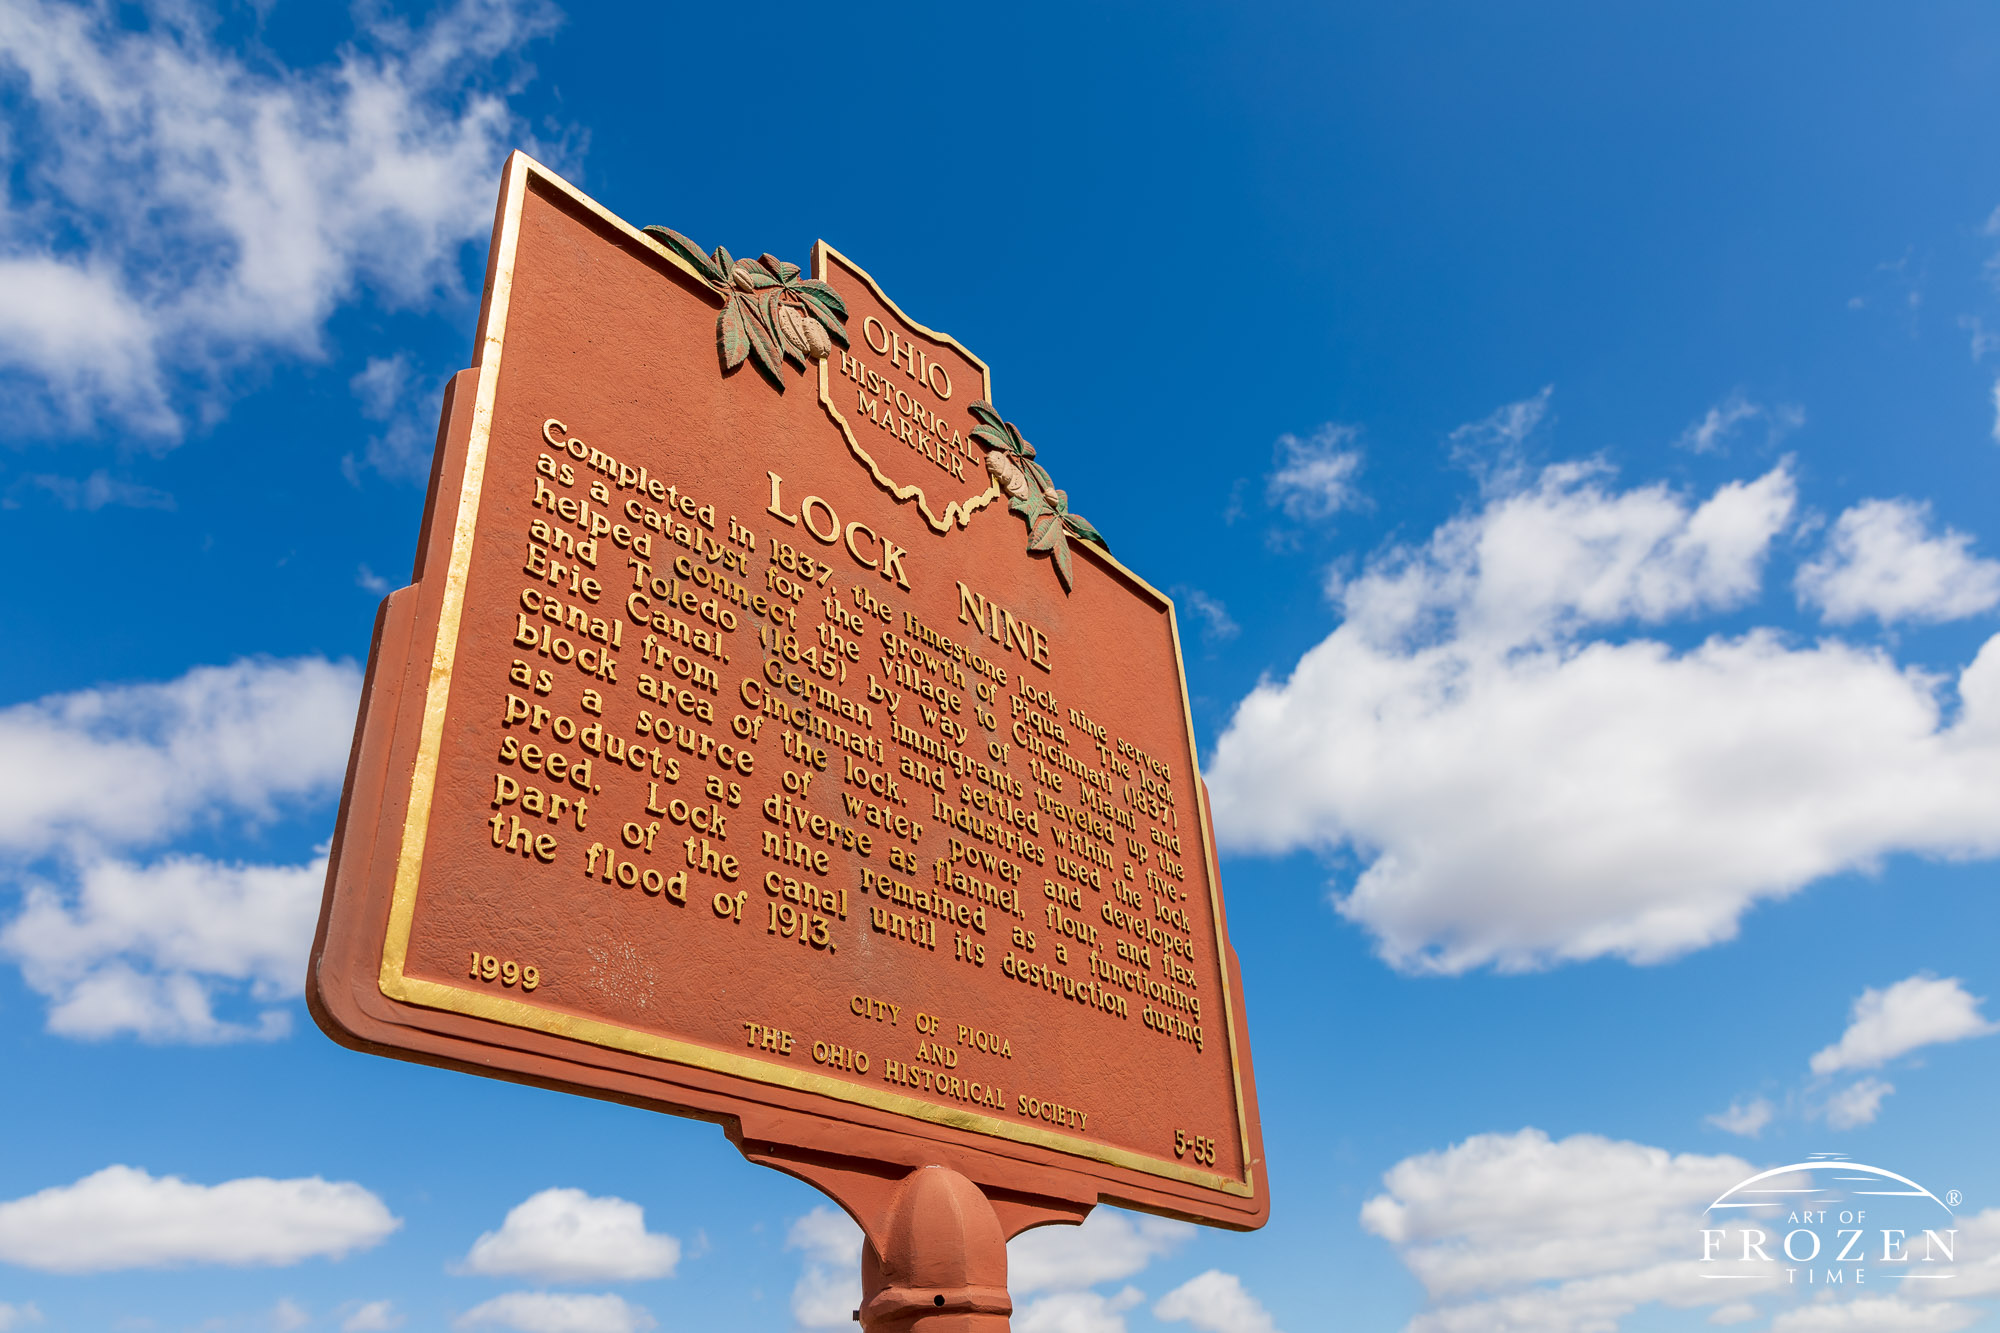 A close up view of the Lock Nine historical marker highlighting the feature's contribution to the Miami-Erie Canal.